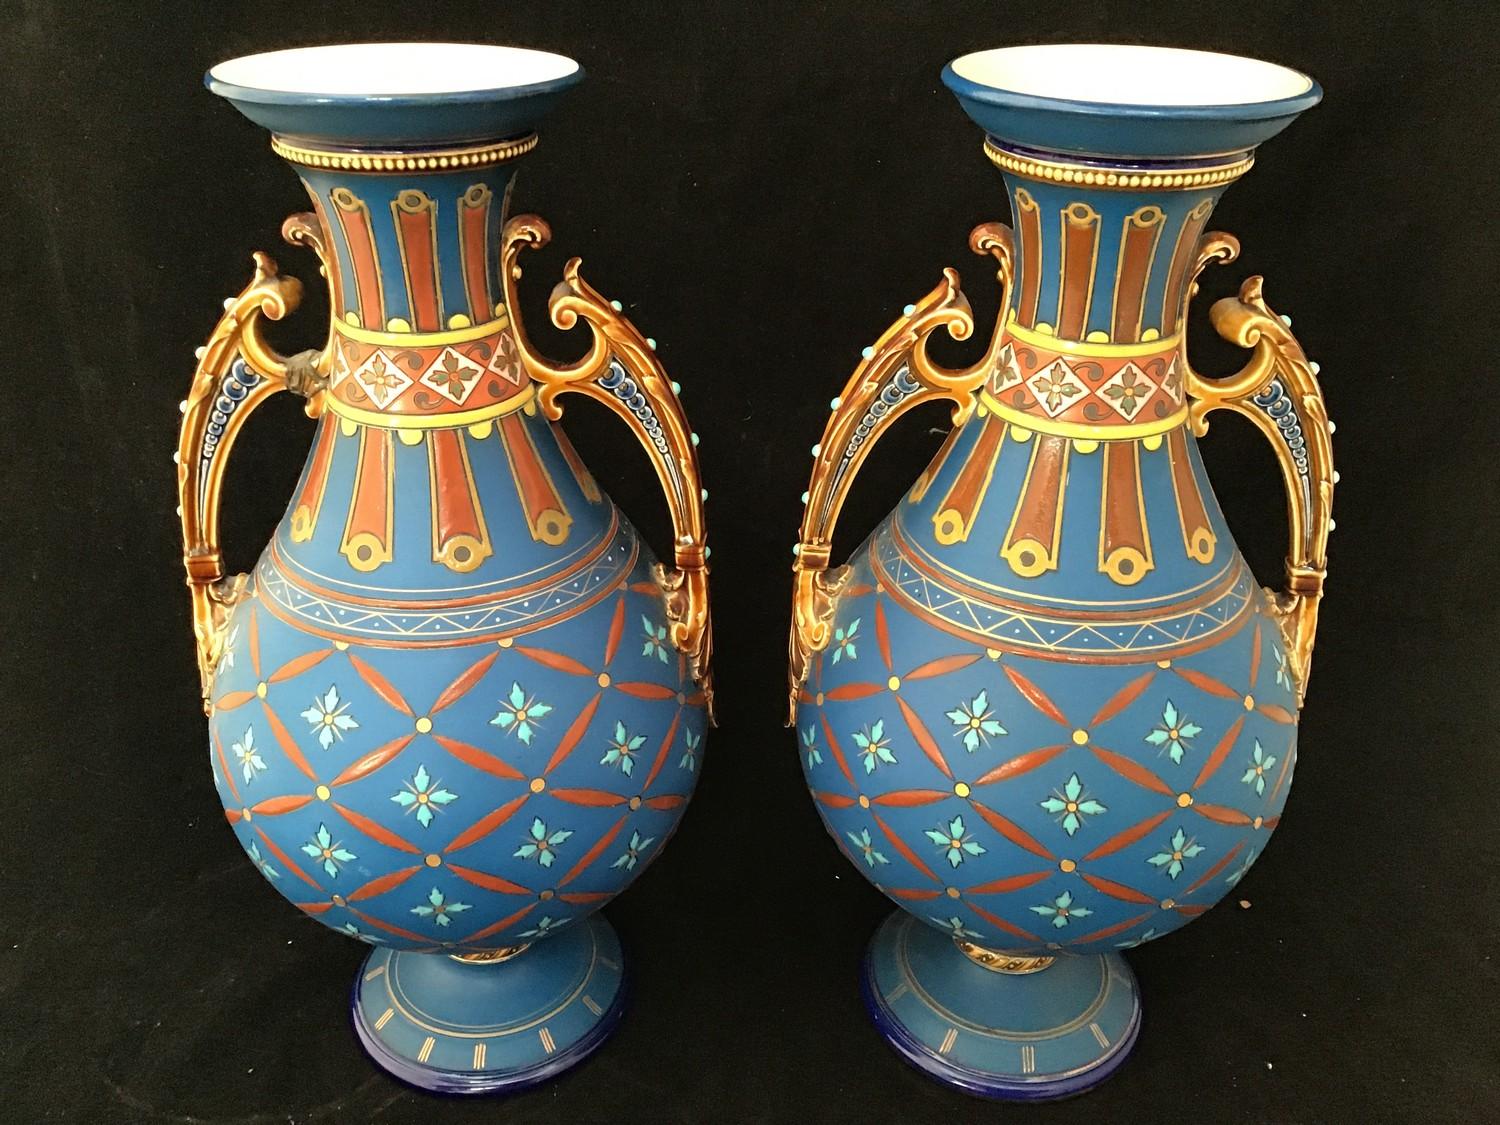 A pair of Mettlach twin-handled vases, of baluster form with beaded necks, ornate scrolled brown